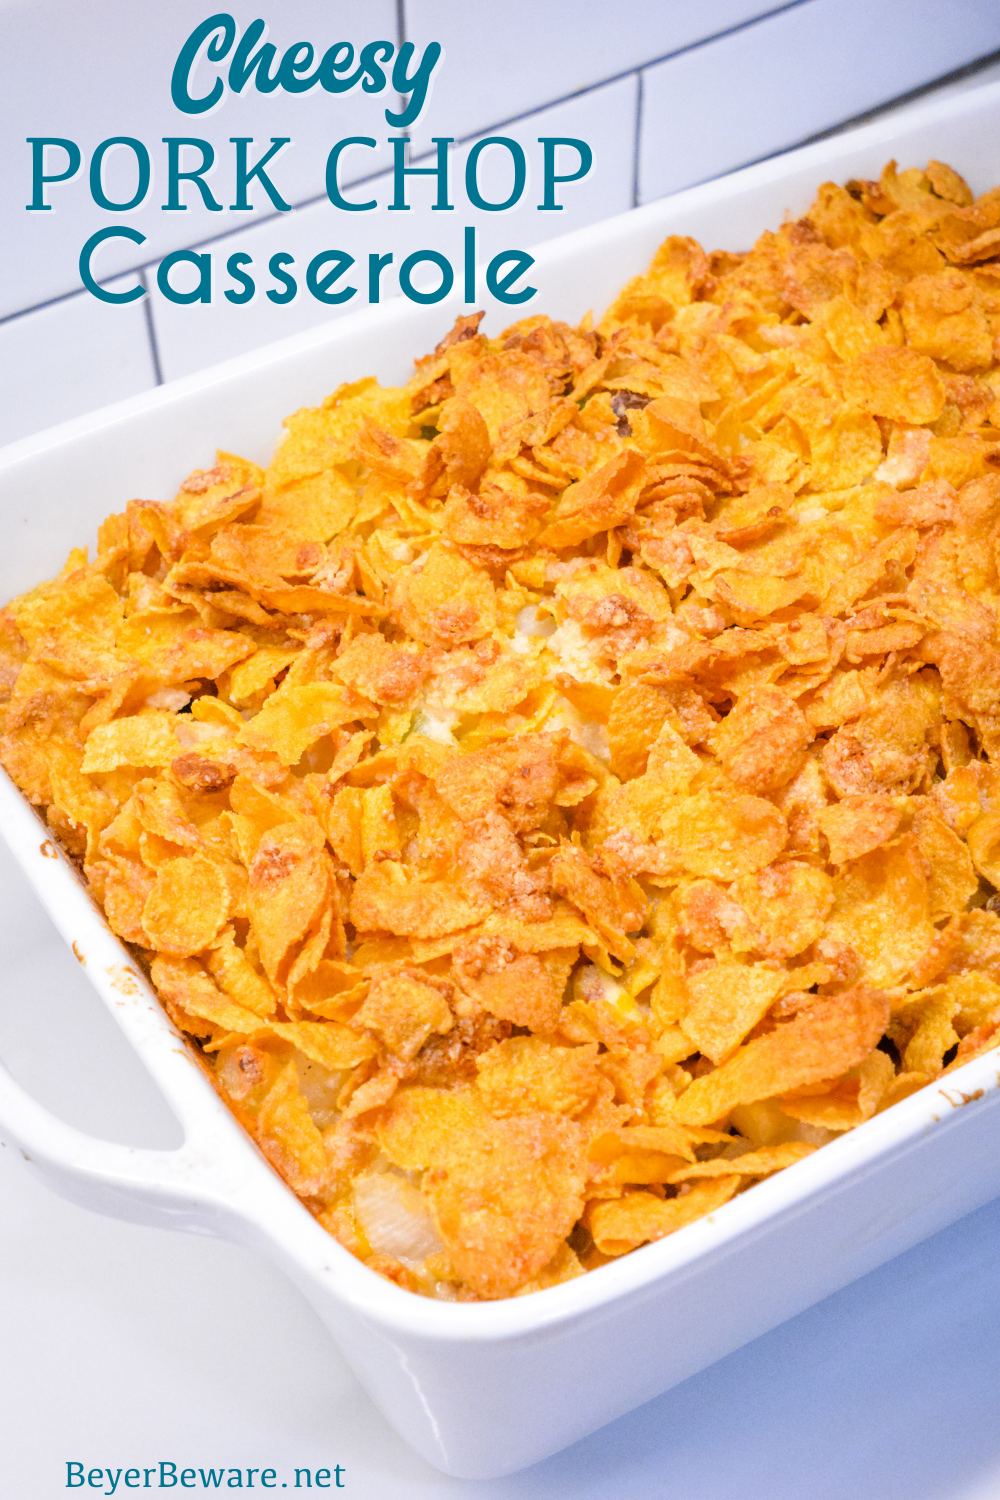 Cheesy pork chop casserole is the perfect way to use leftover pork ...